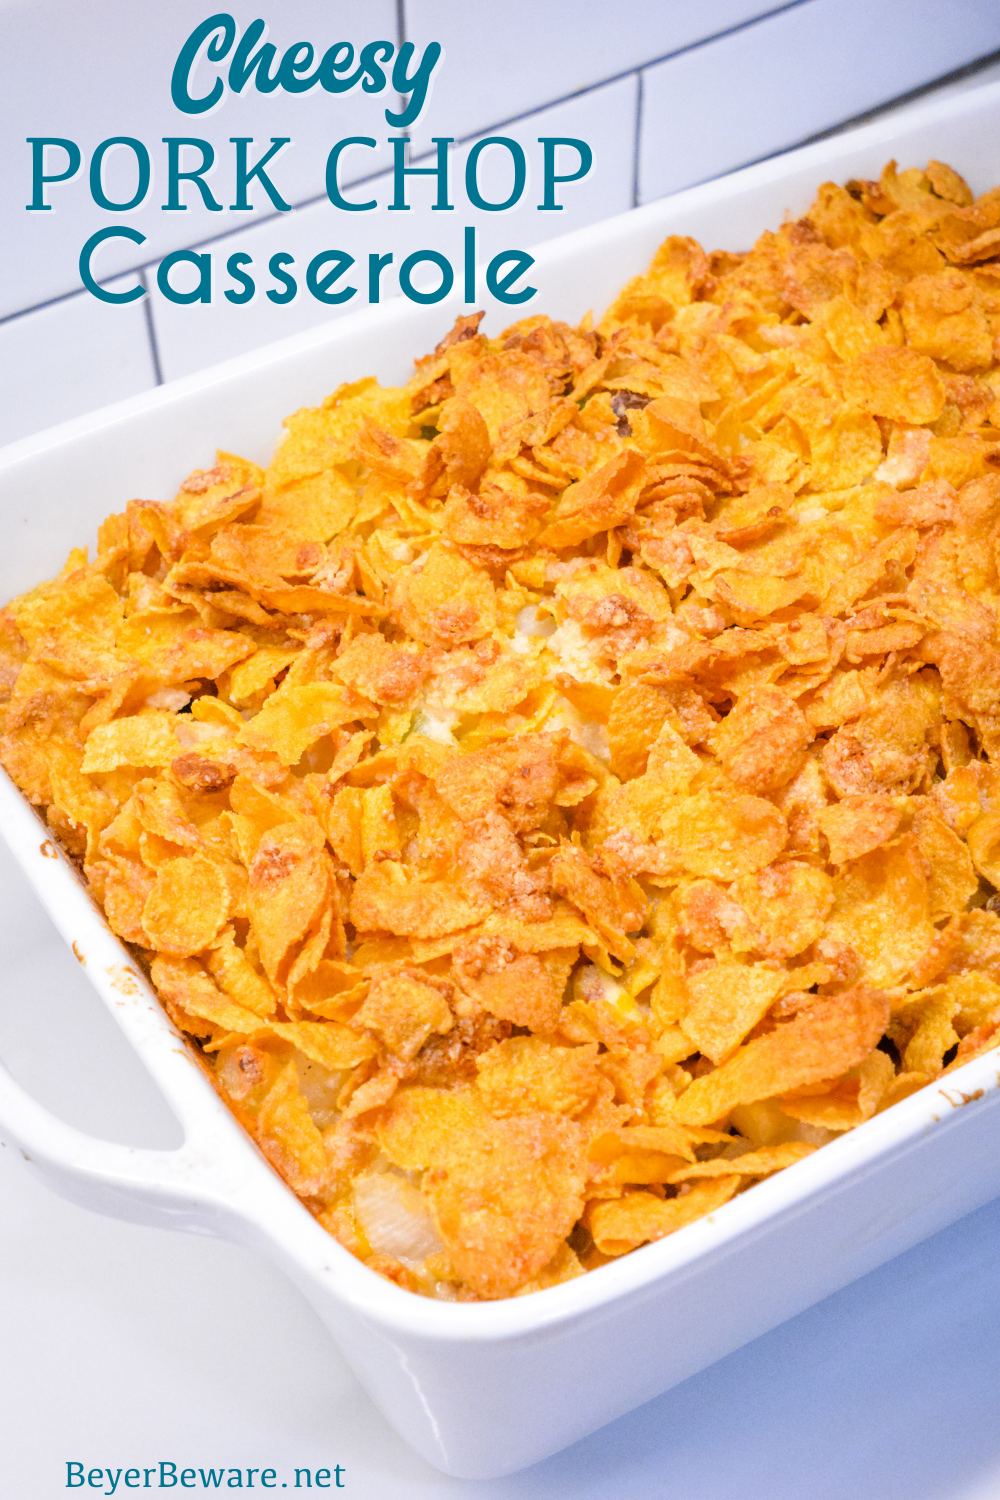 Cheesy pork chop casserole is the perfect way to use leftover pork ...